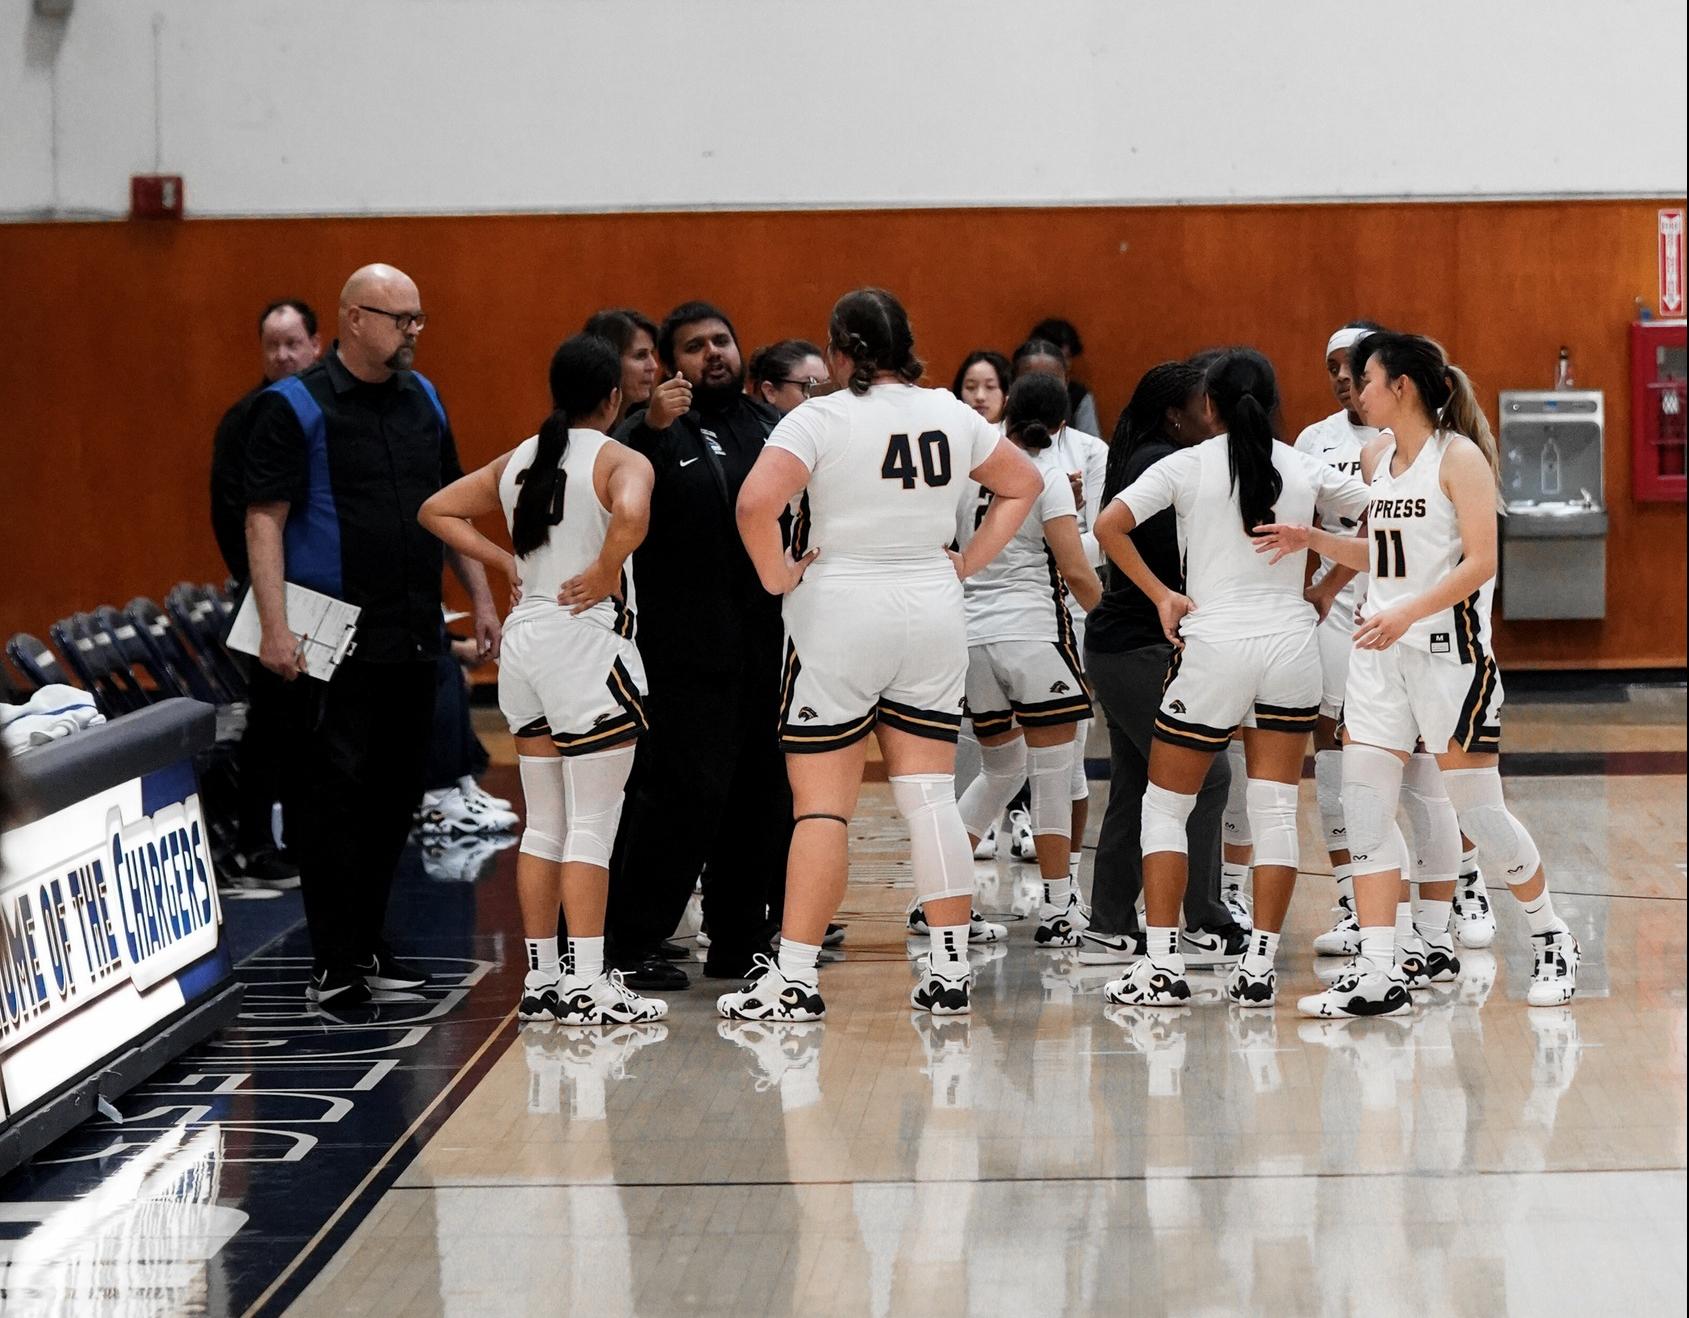 Women's Basketball Win Fourth Game in a Row